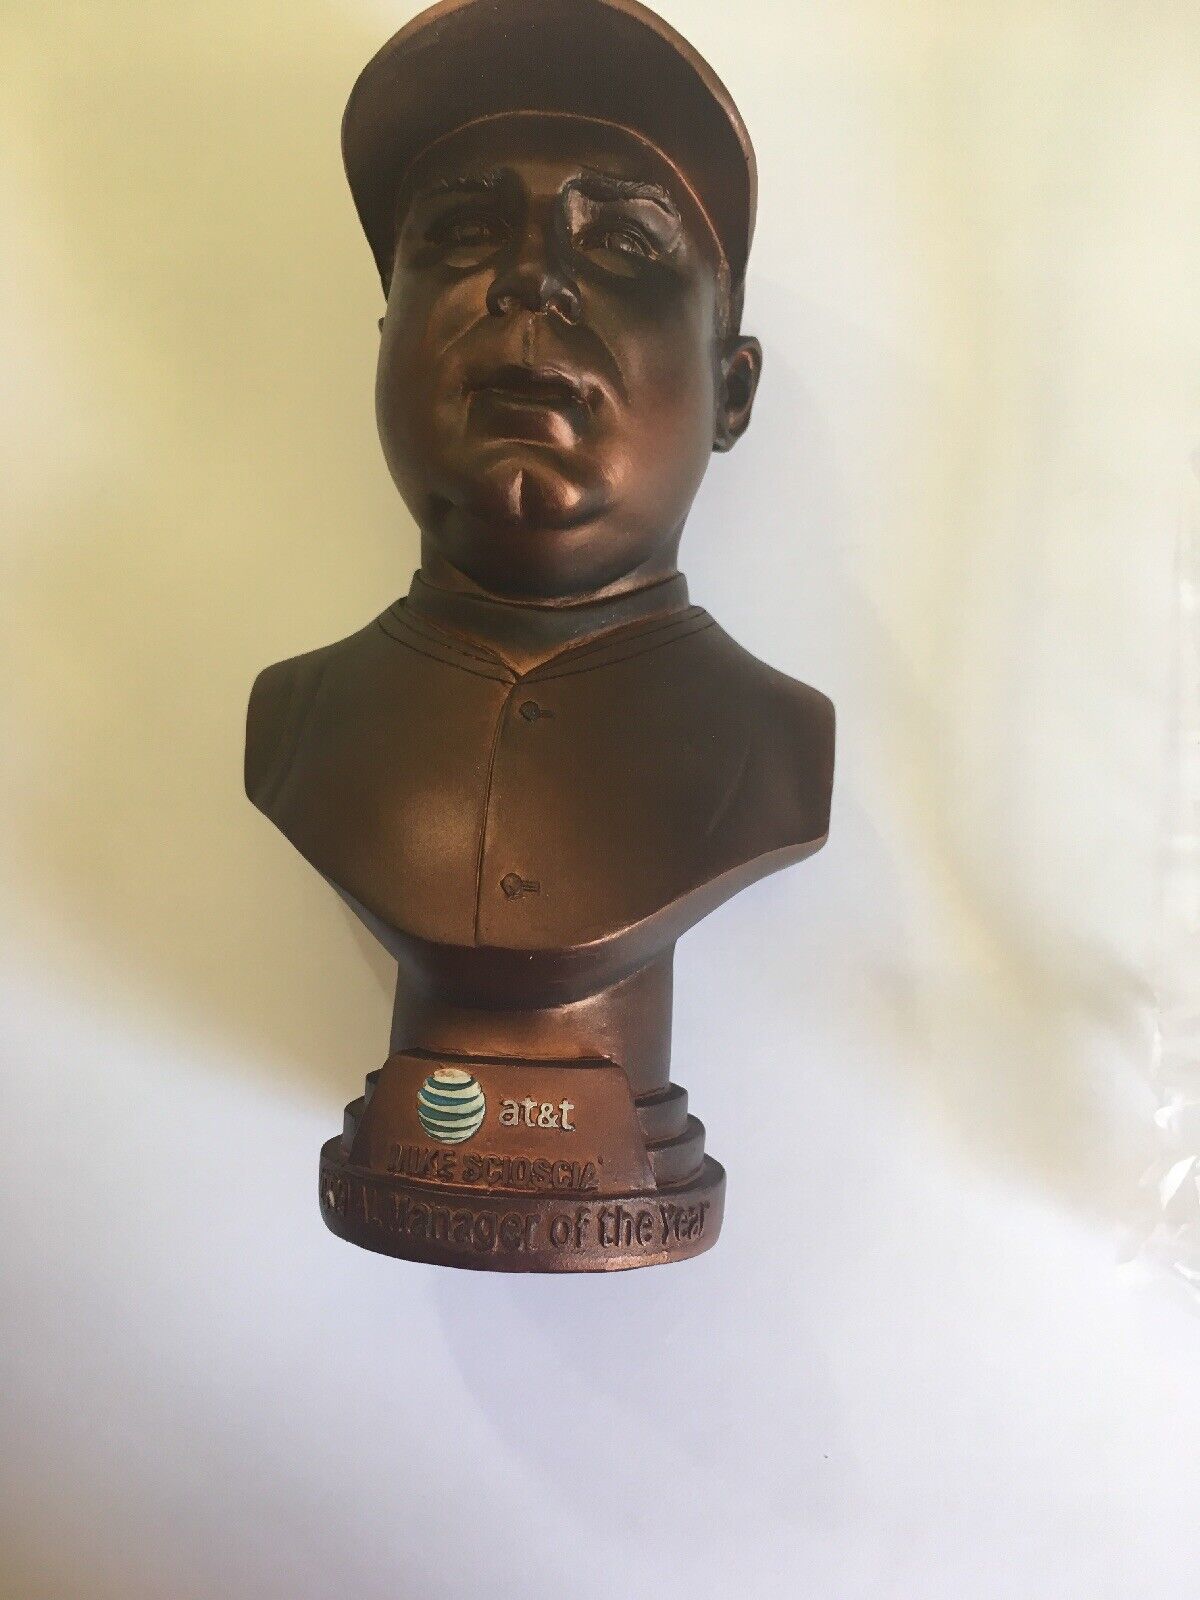 MIKE SCIOSCIA  ANGELS A.L. 2009 MANAGER OF THE YEAR BUST NIB